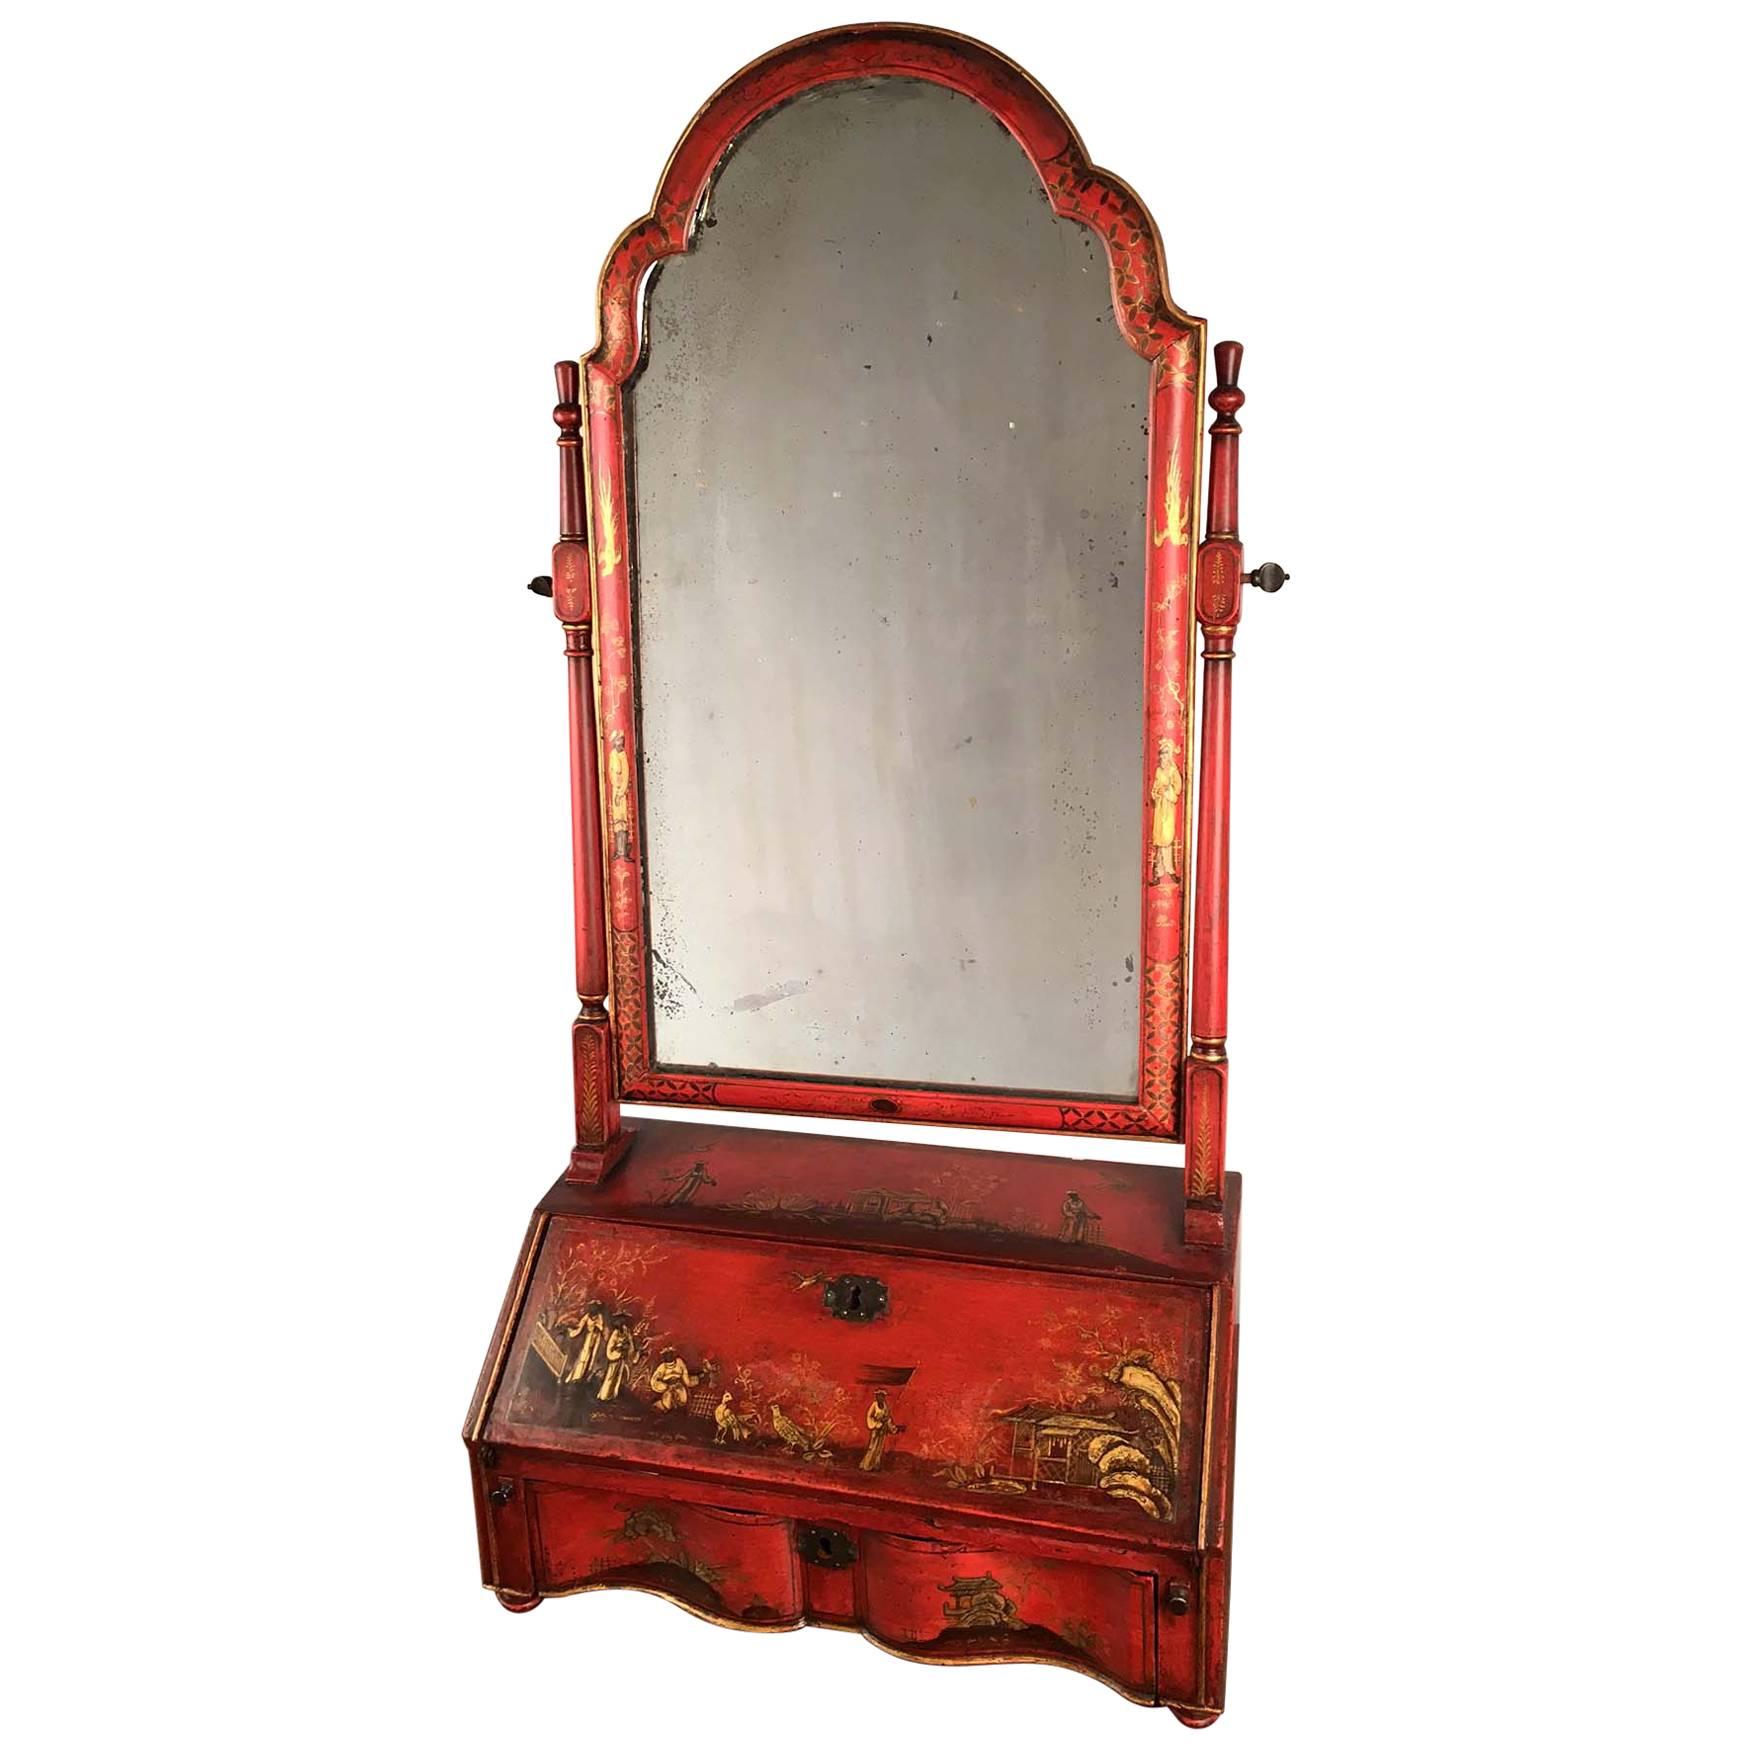 George 1 Red Japanned and Gilt Toilet Mirror